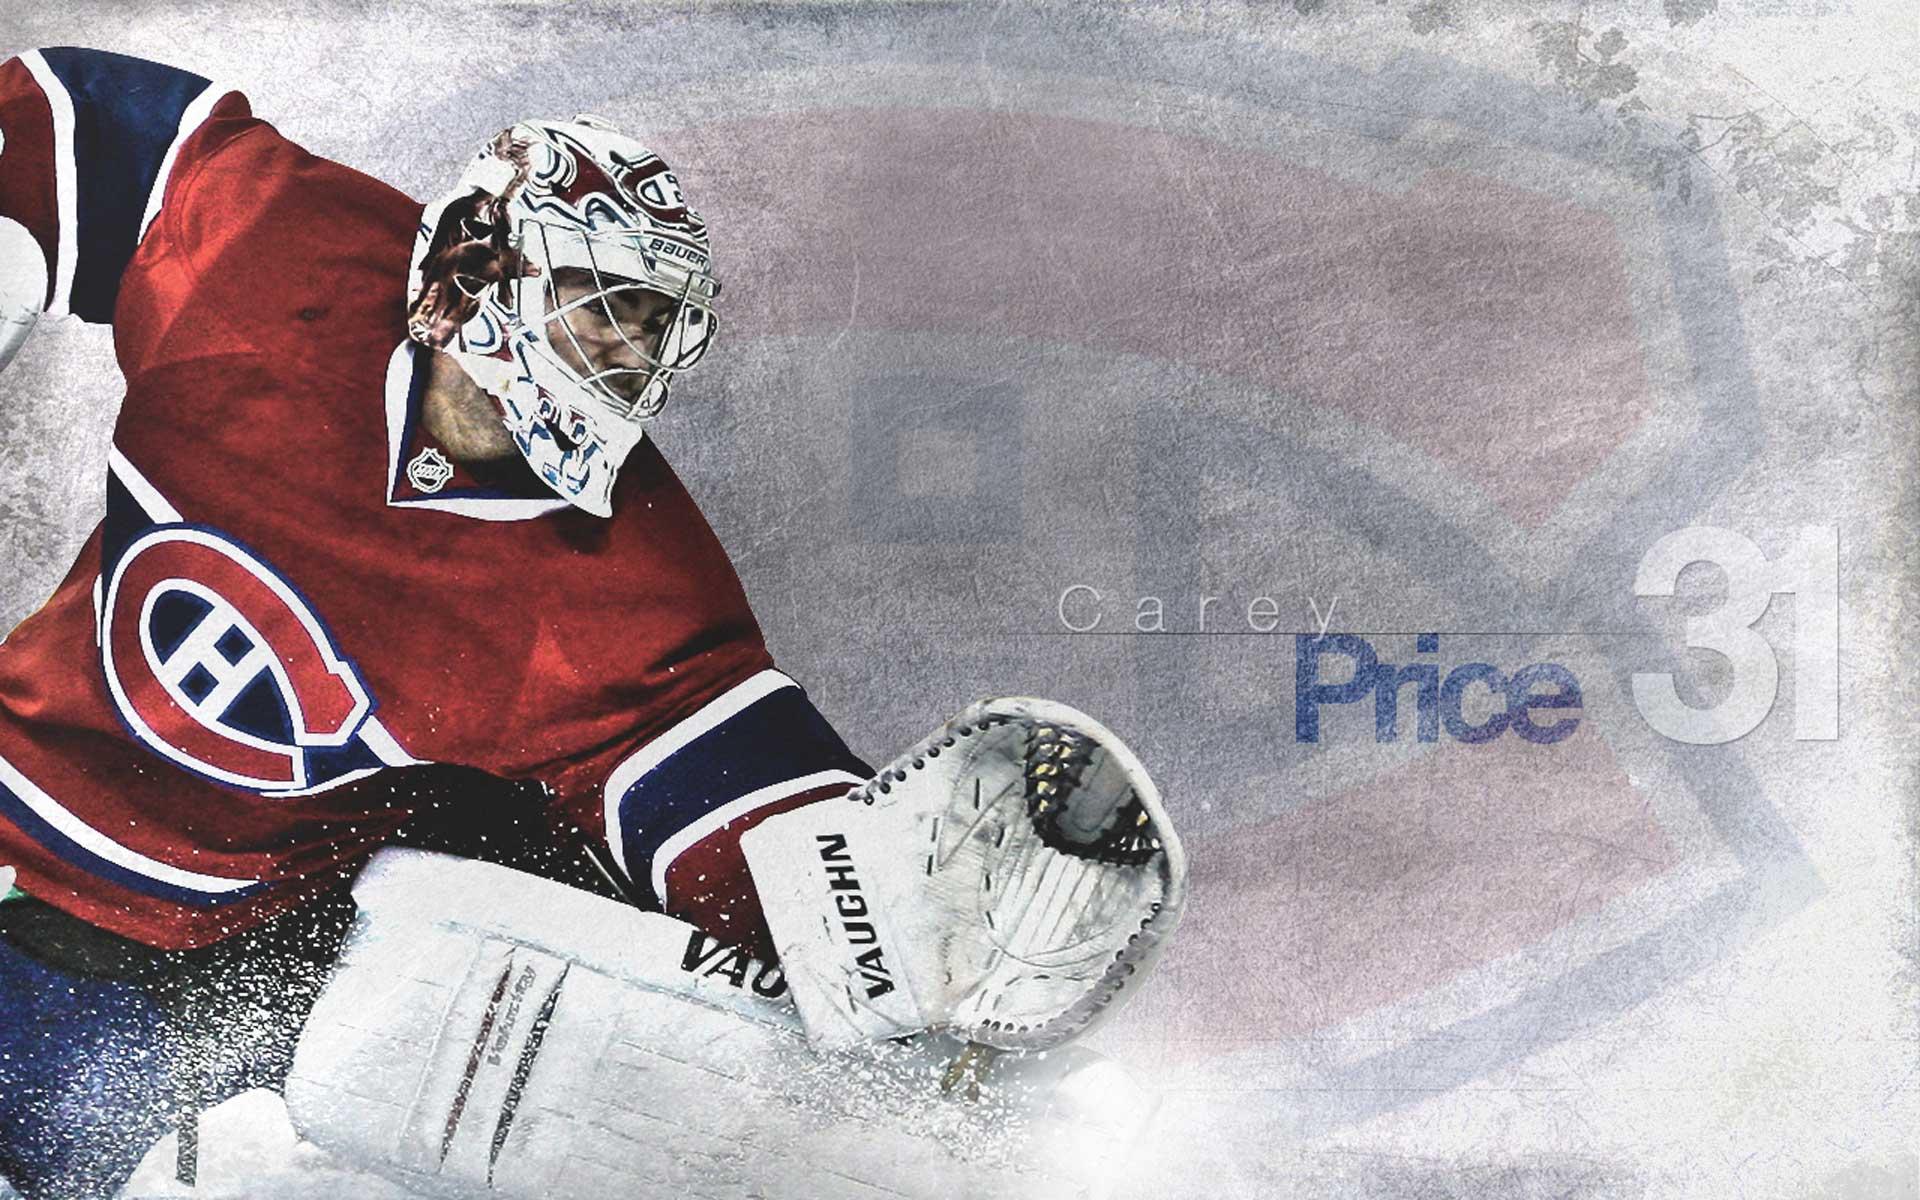 Free Montreal Canadiens background image. Montreal Canadiens